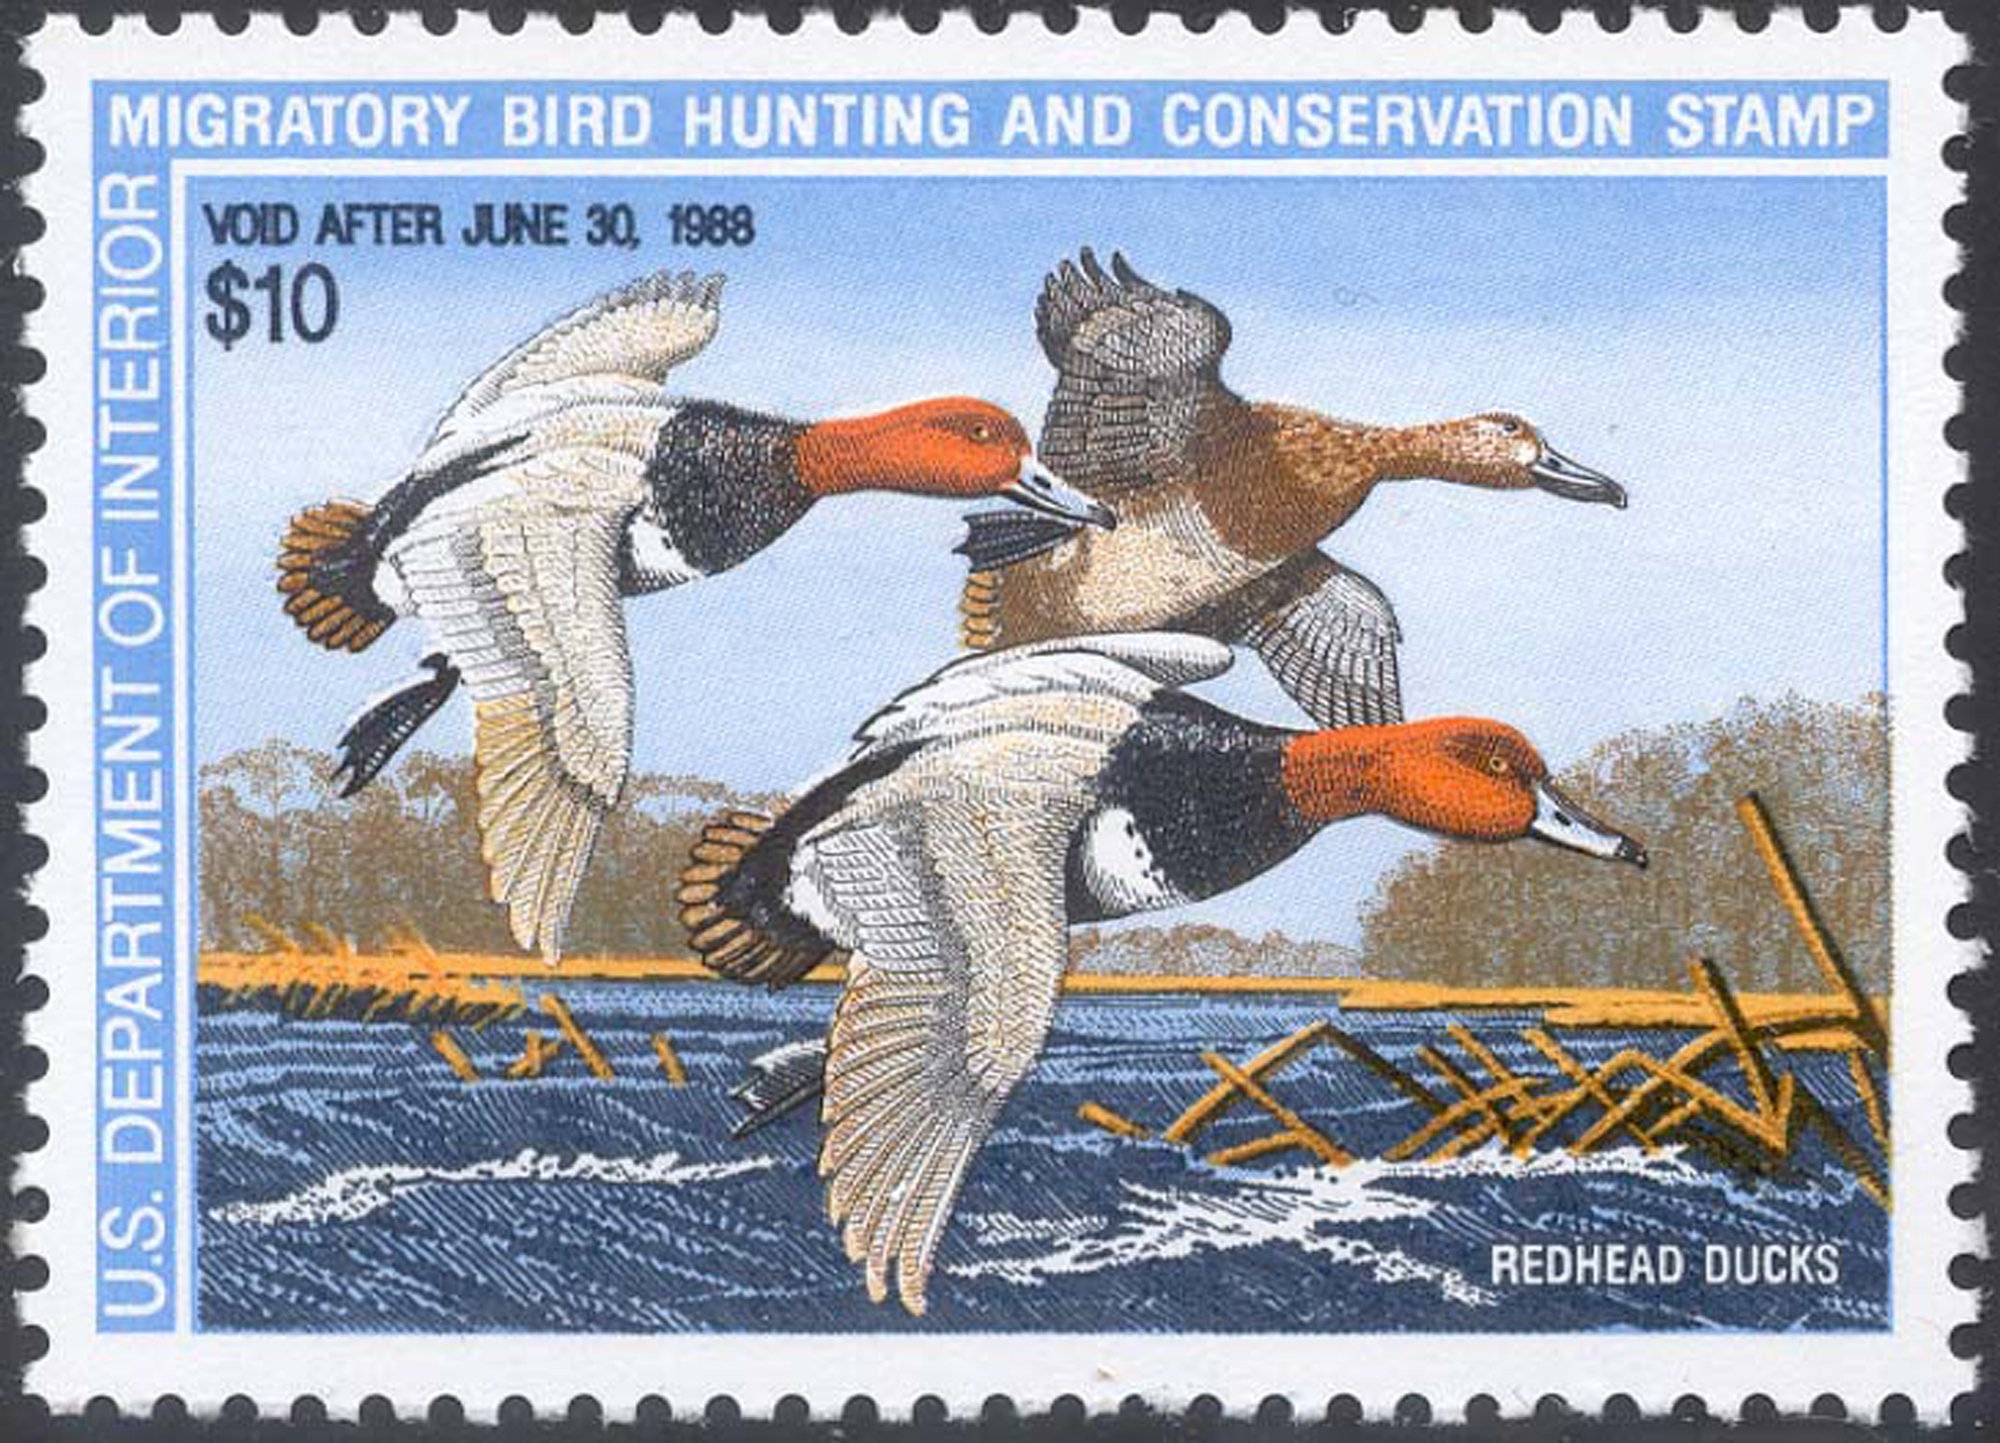 Redheads Federal Duck Stamp Ten Dollar Value Mint Nh Very Etsy